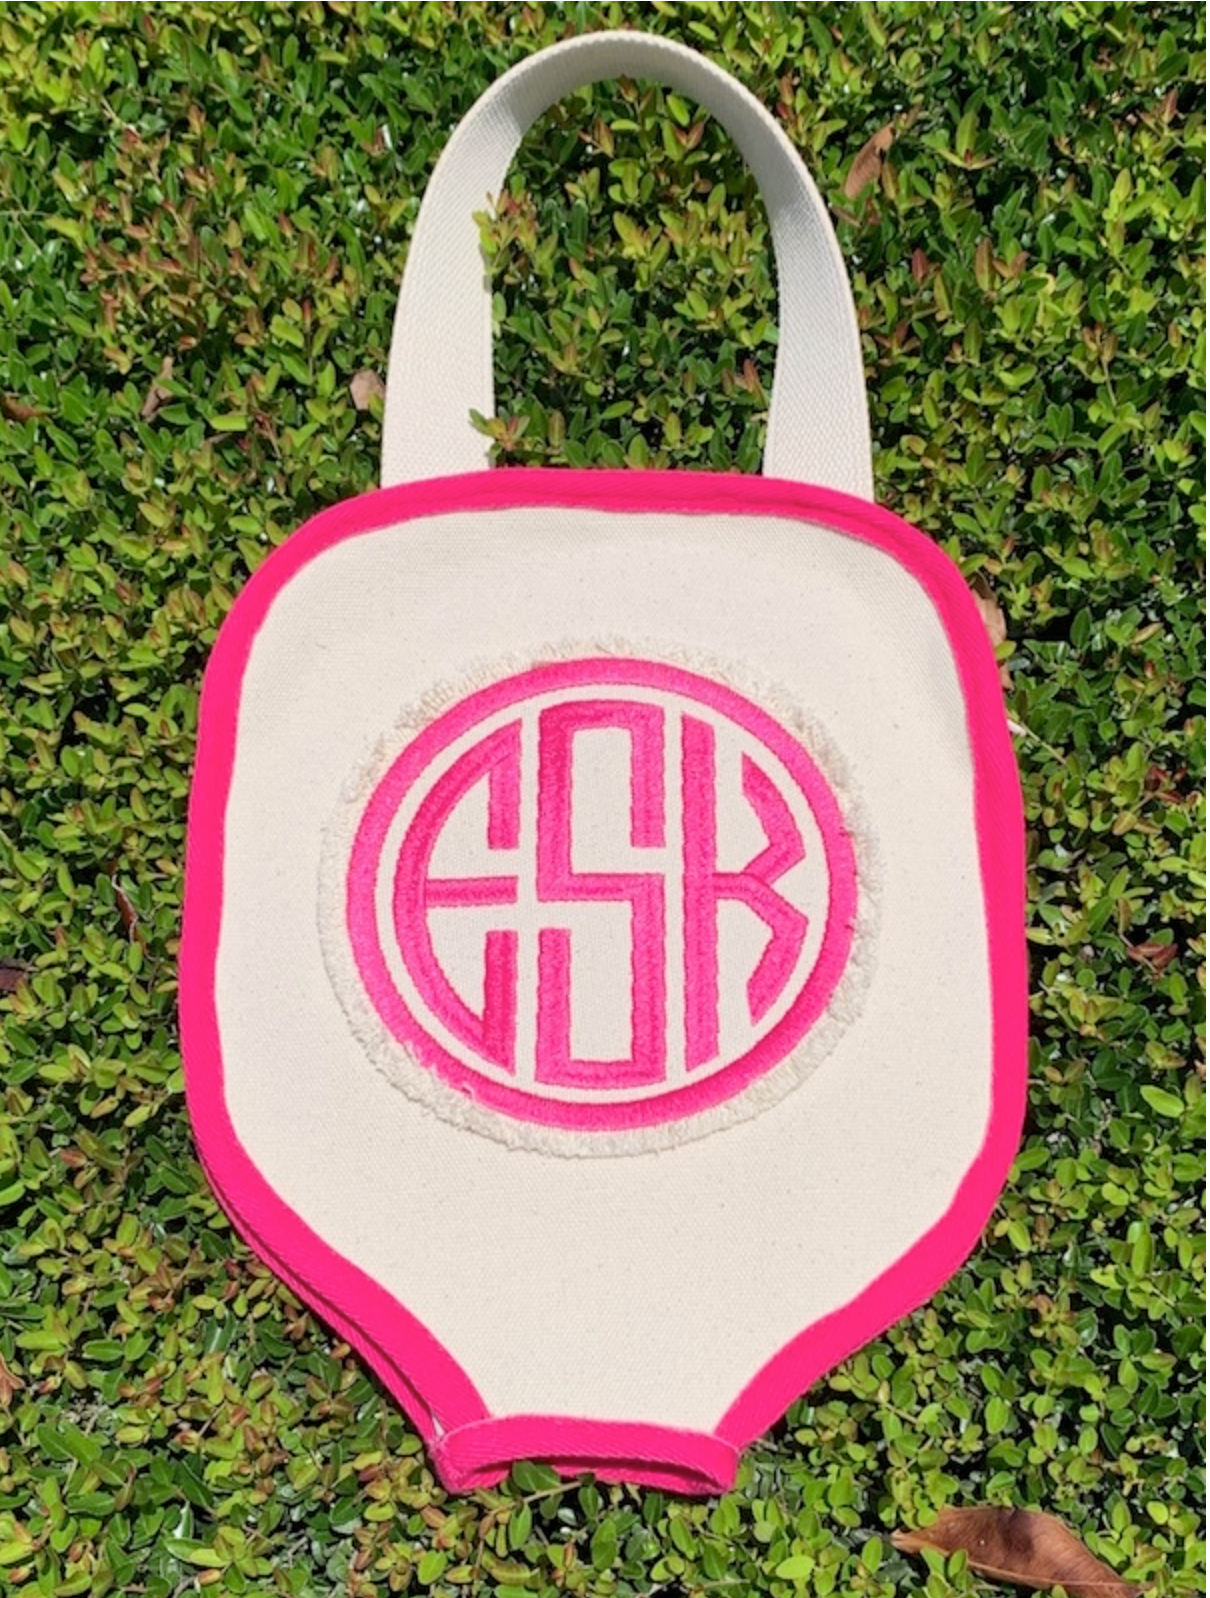 Tennis Racket Cover & Cases - Customizable